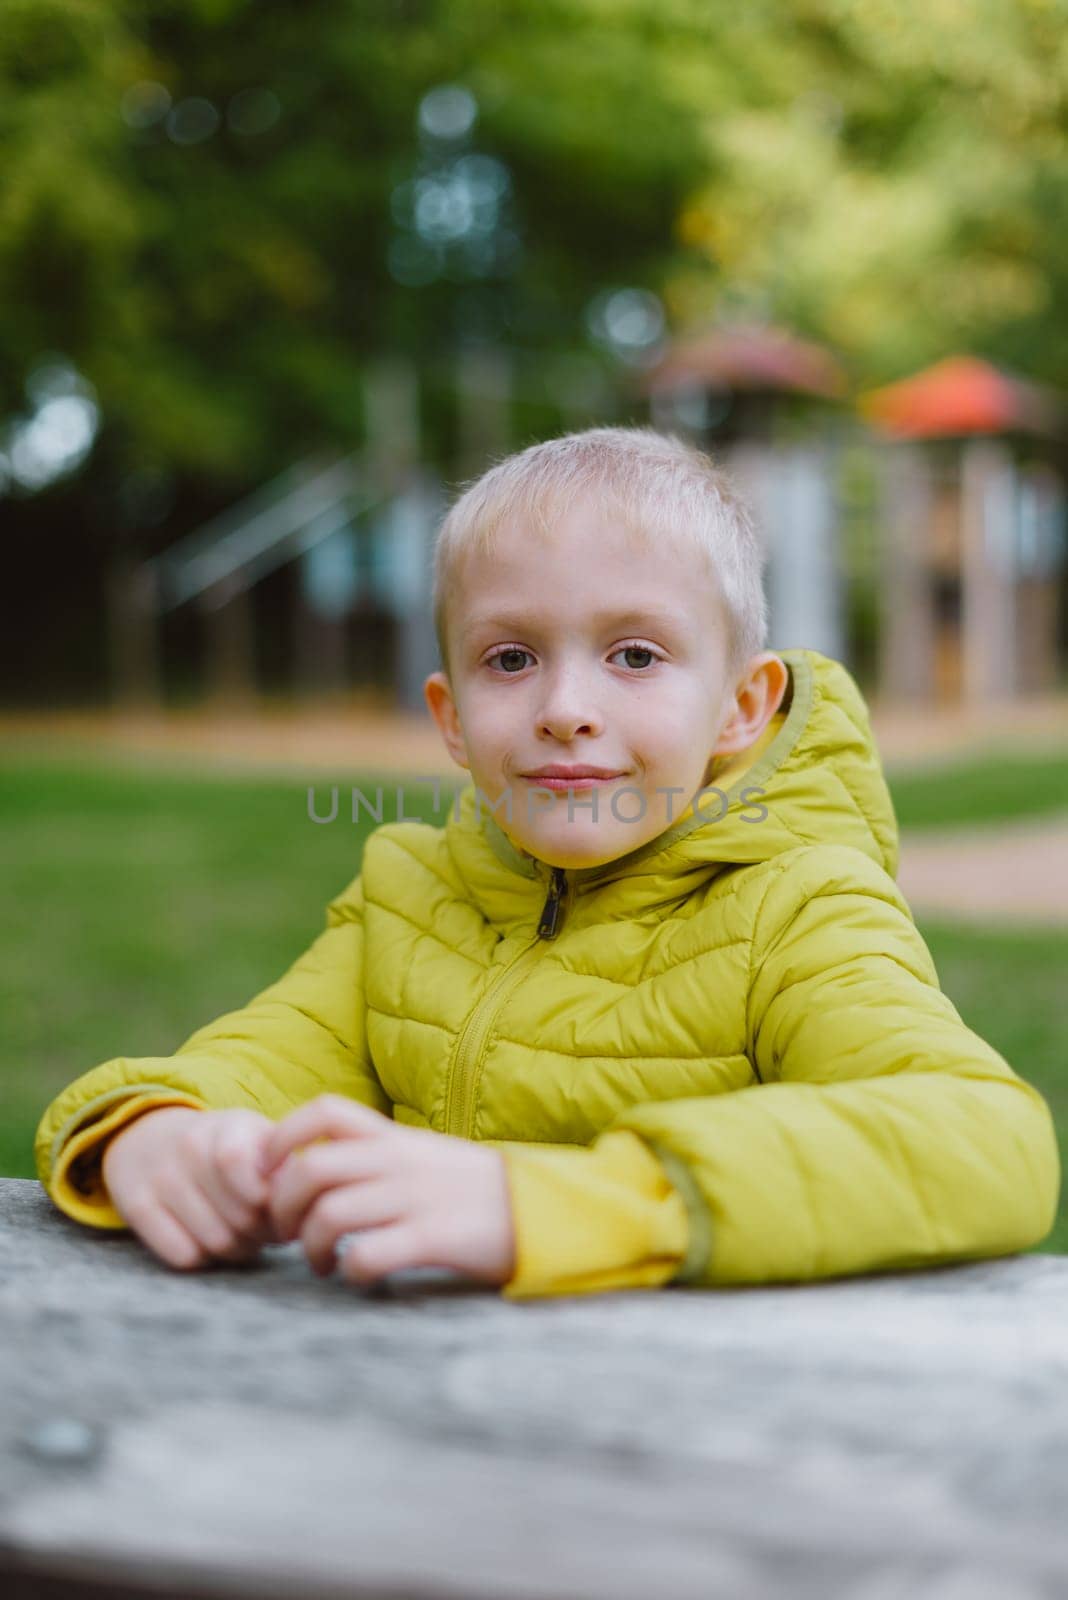 A boy sits at a table in the park in the fall season. Child Boy Son In Autumn Park, Sitting On Wooden Bench And Table. Little Kid Outdoors. by Andrii_Ko